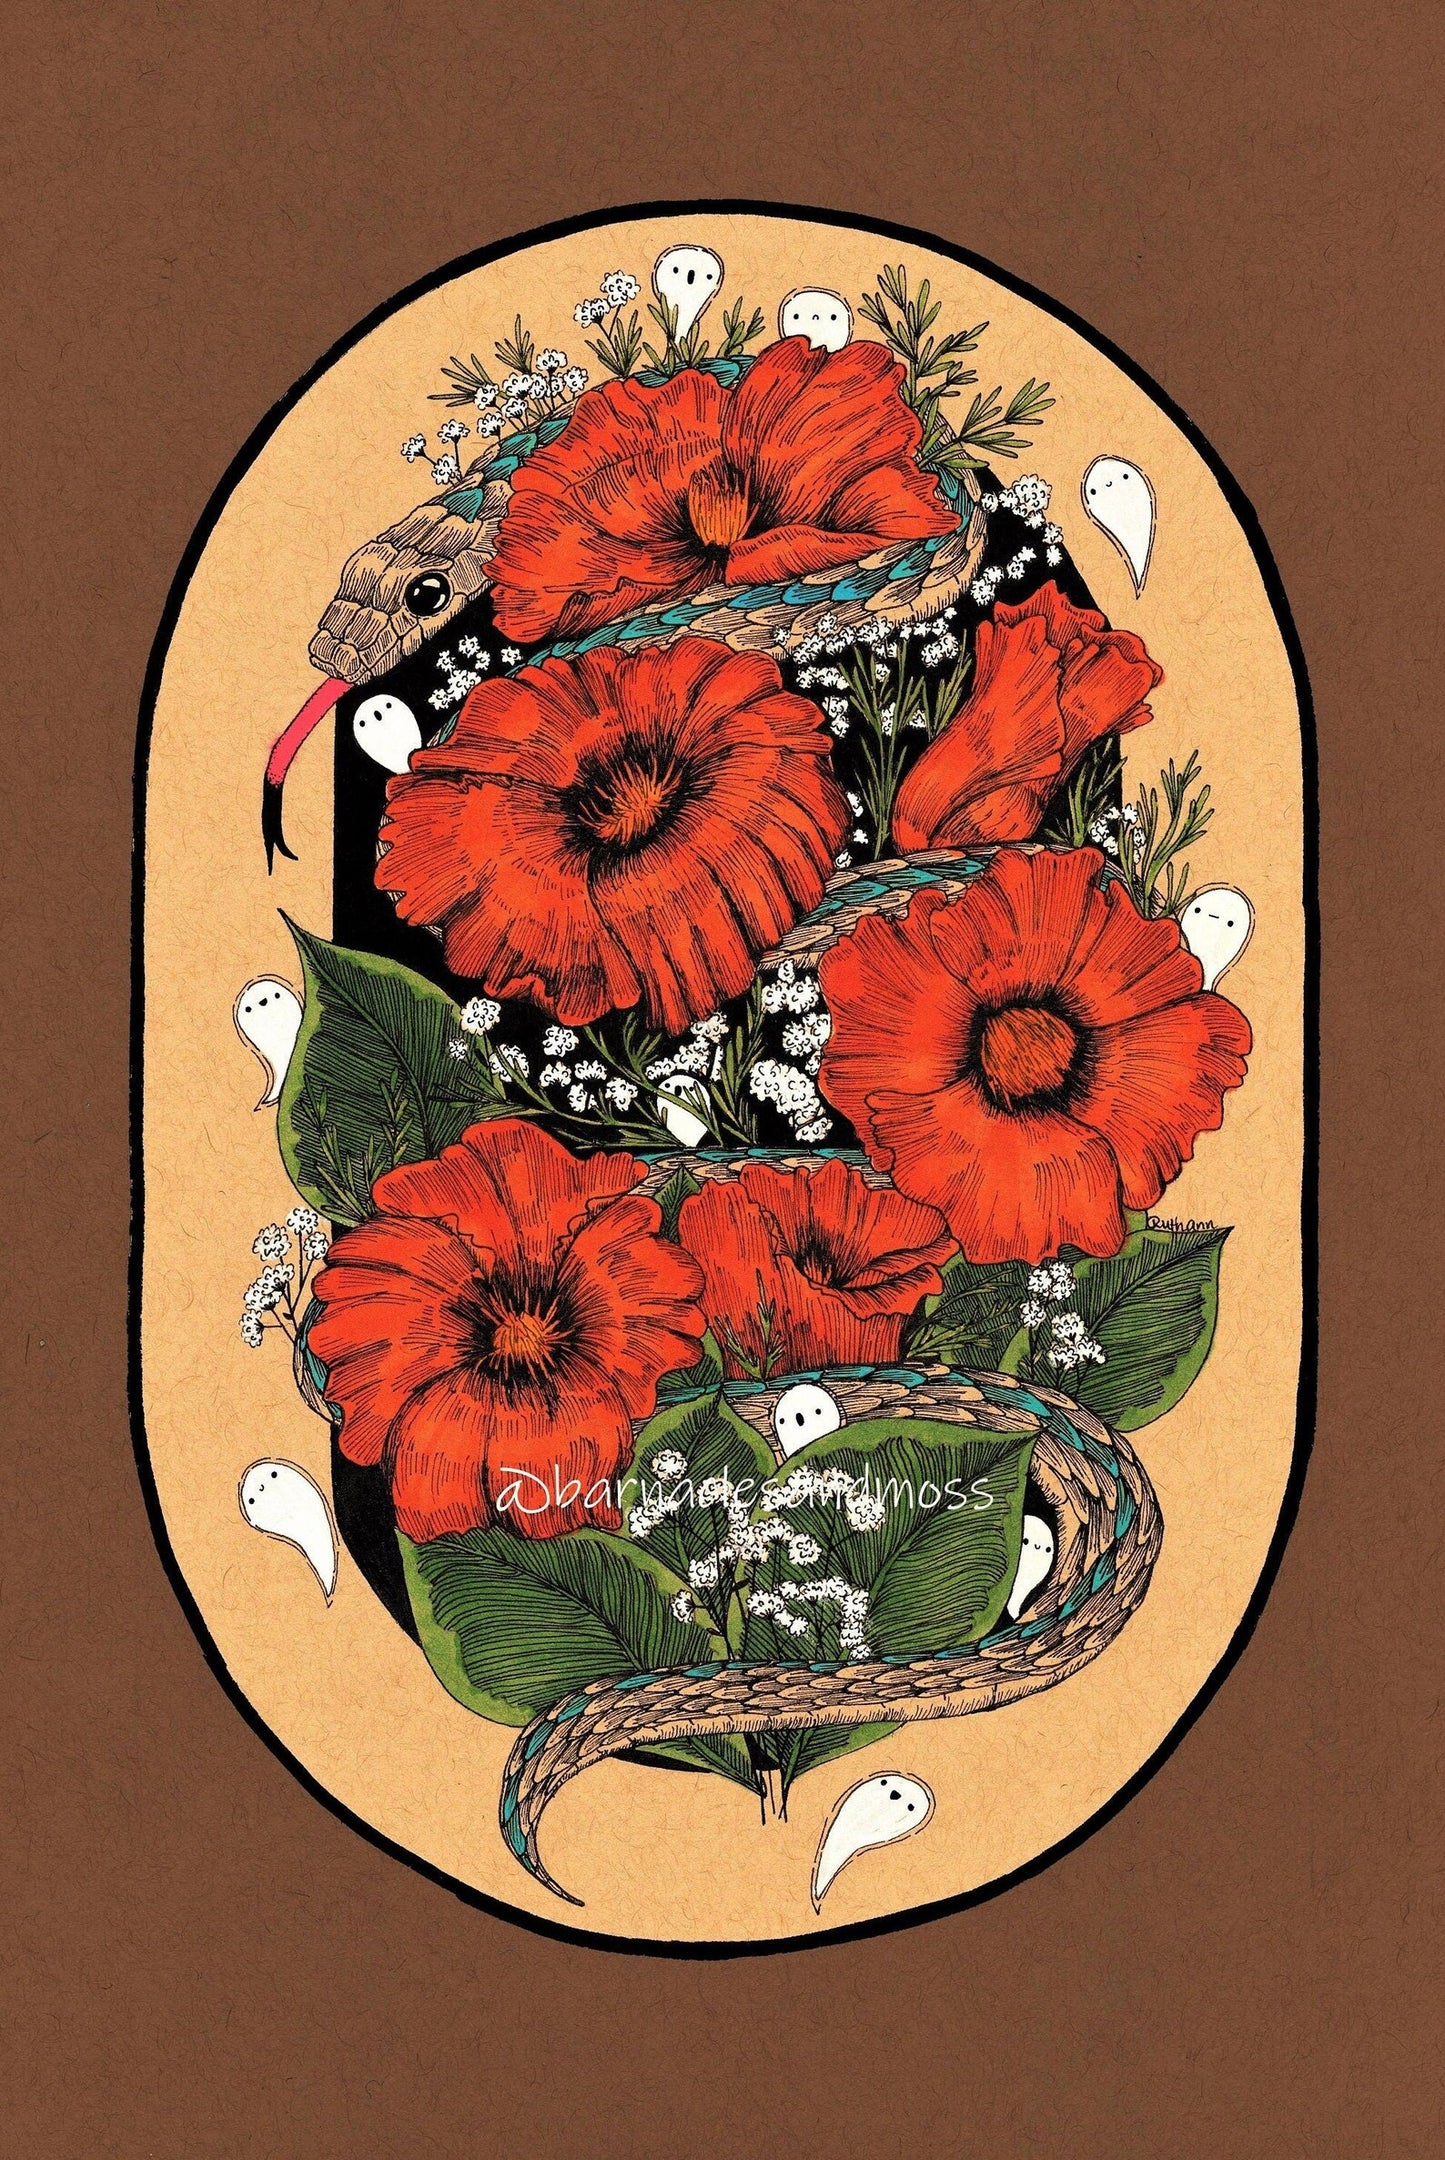 Barnacles and Moss "Garter Snake in the Haunted Poppies"